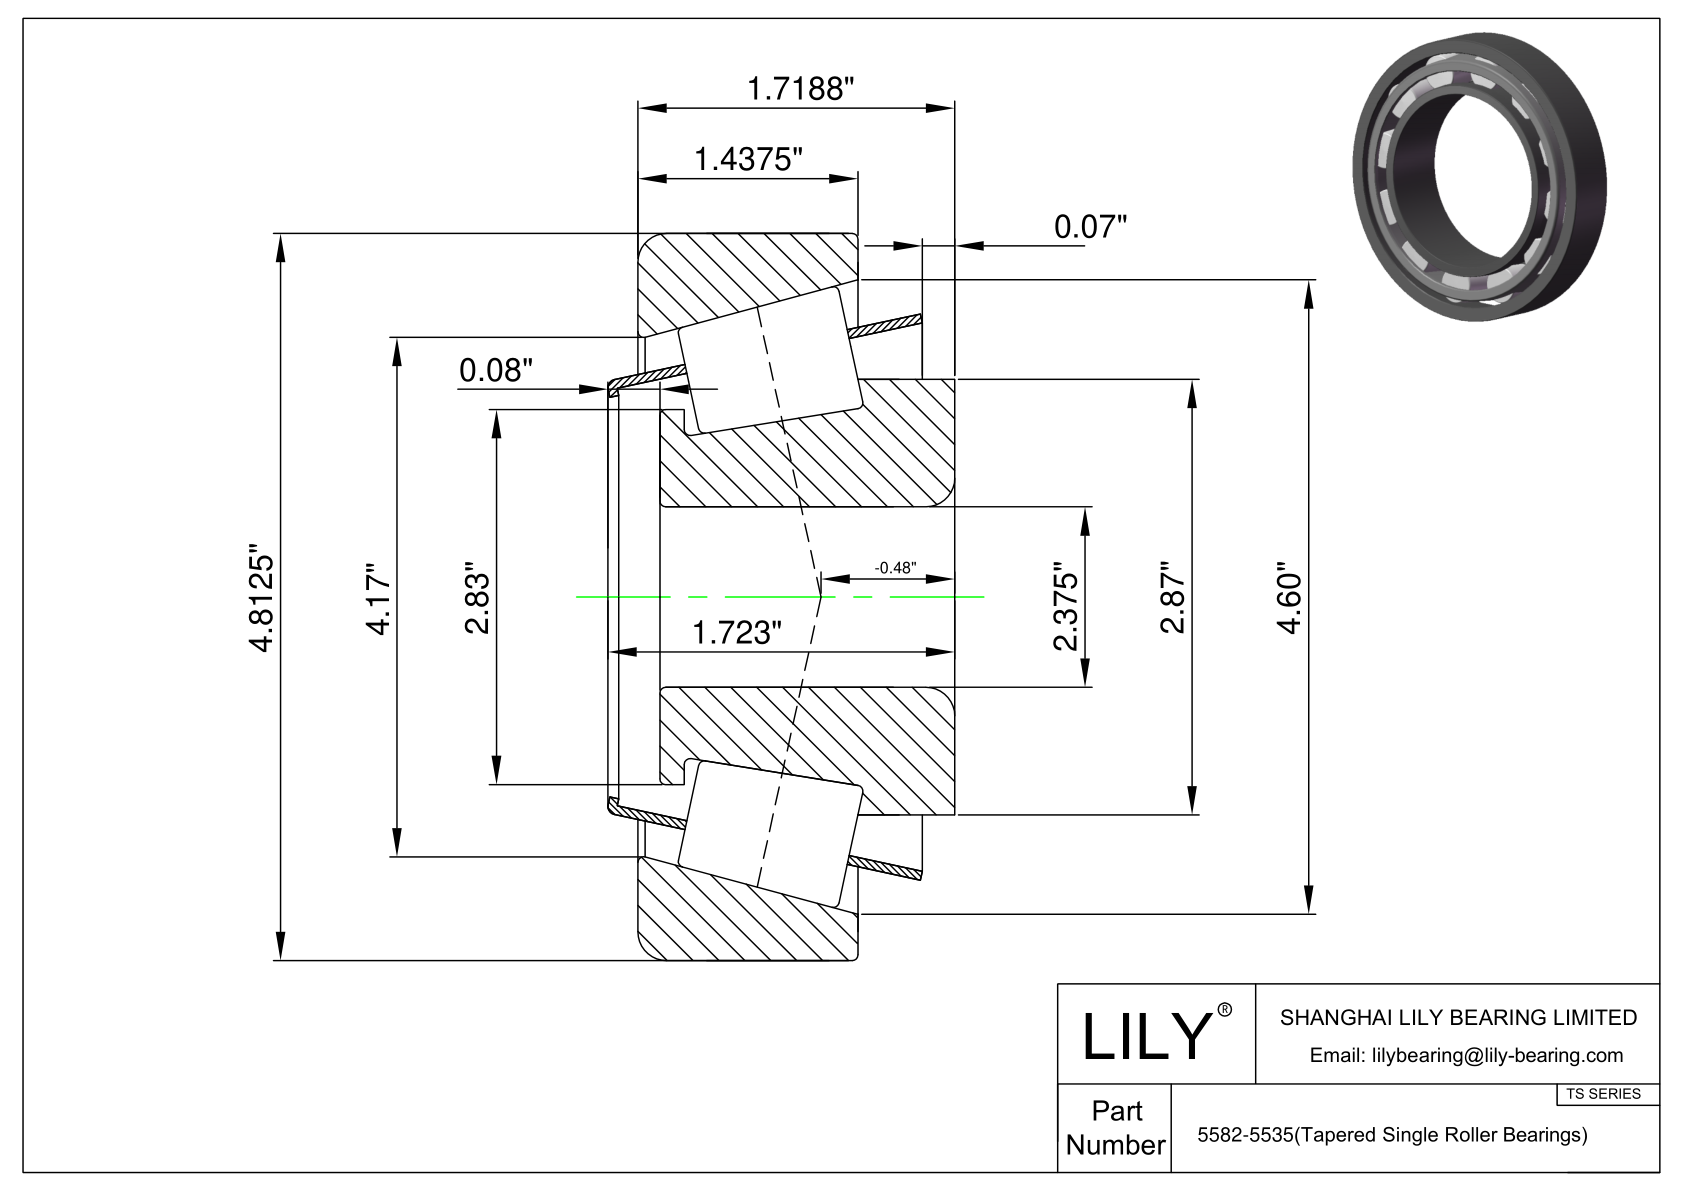 5582-5535 TS (Tapered Single Roller Bearings) (Imperial) cad drawing